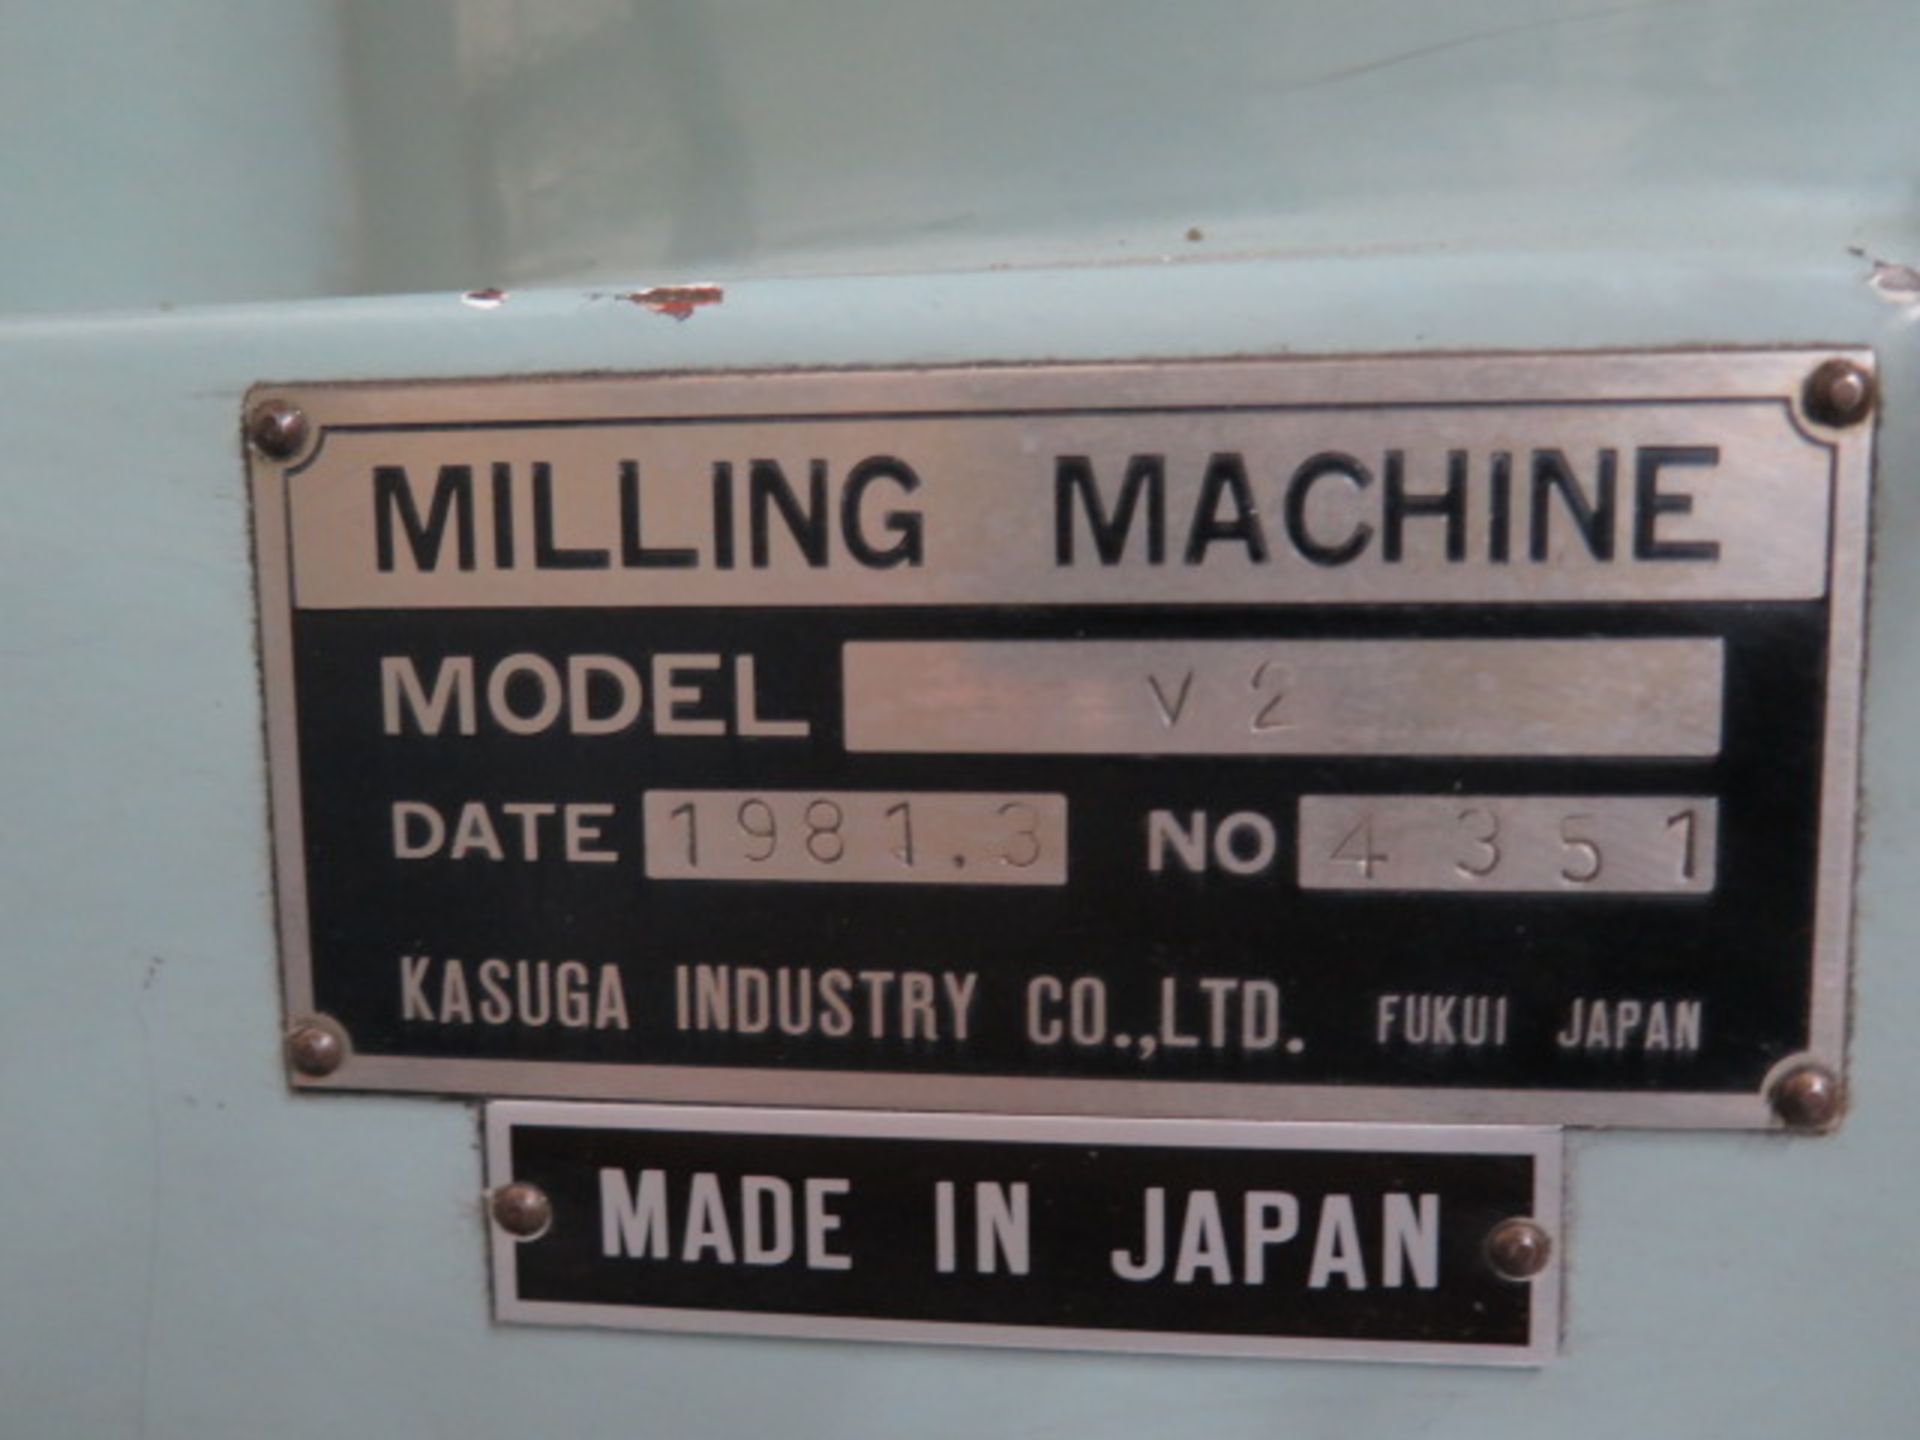 Kasuga V2 Westway Production Machinery Series II 3-Axis CNC Vertical Mill s/n 4351 SOLD AS IS - Image 13 of 13